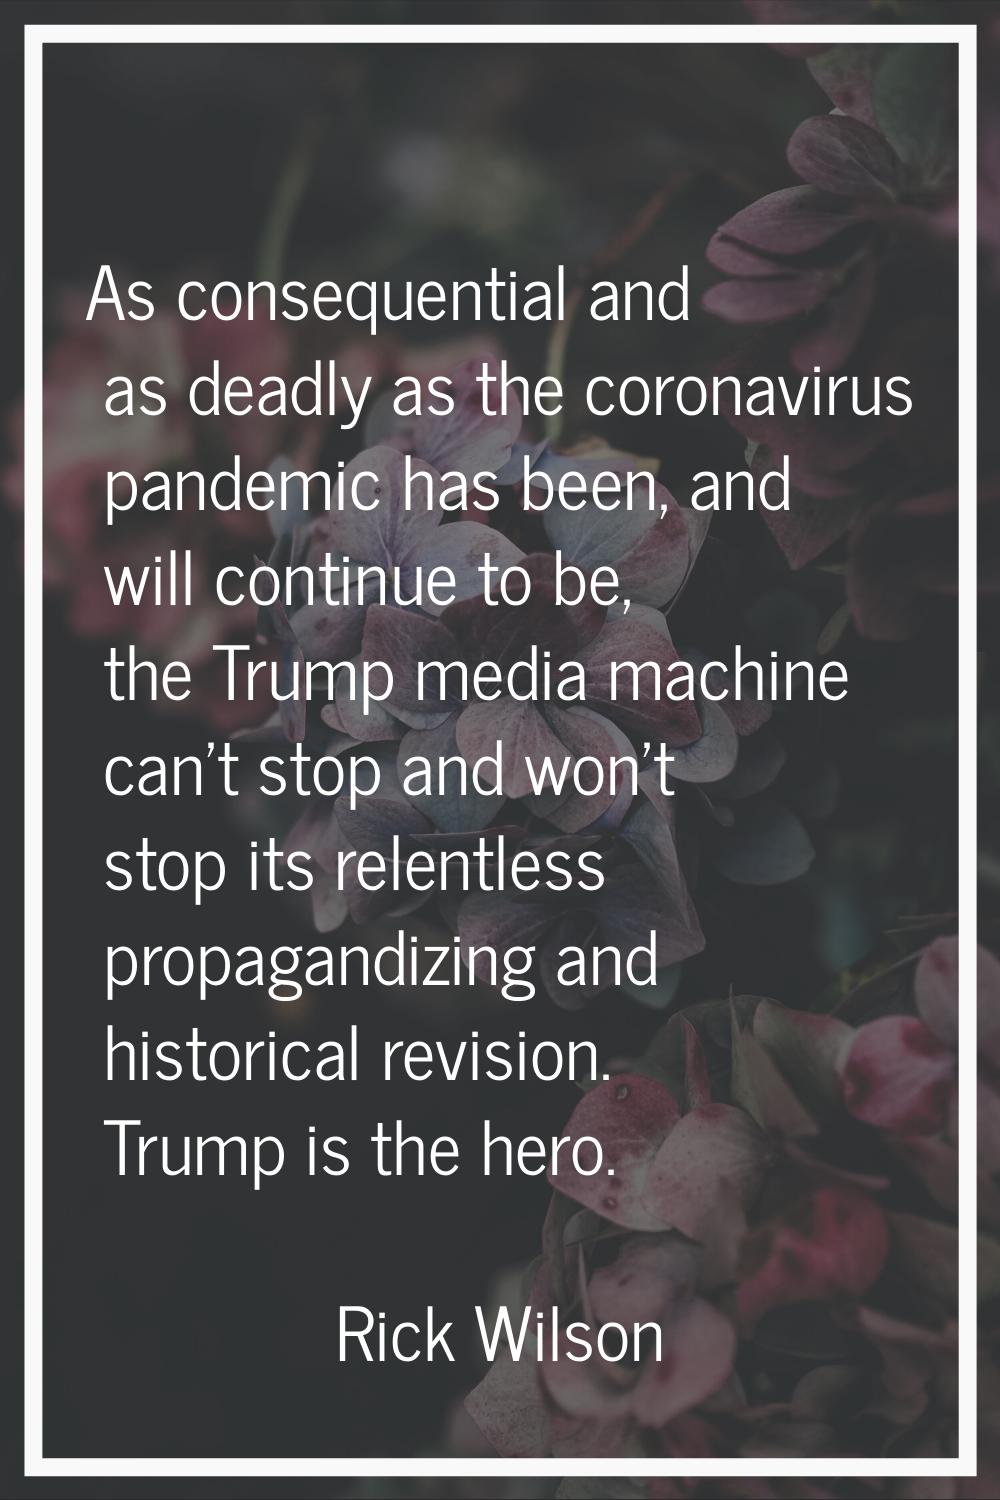 As consequential and as deadly as the coronavirus pandemic has been, and will continue to be, the T